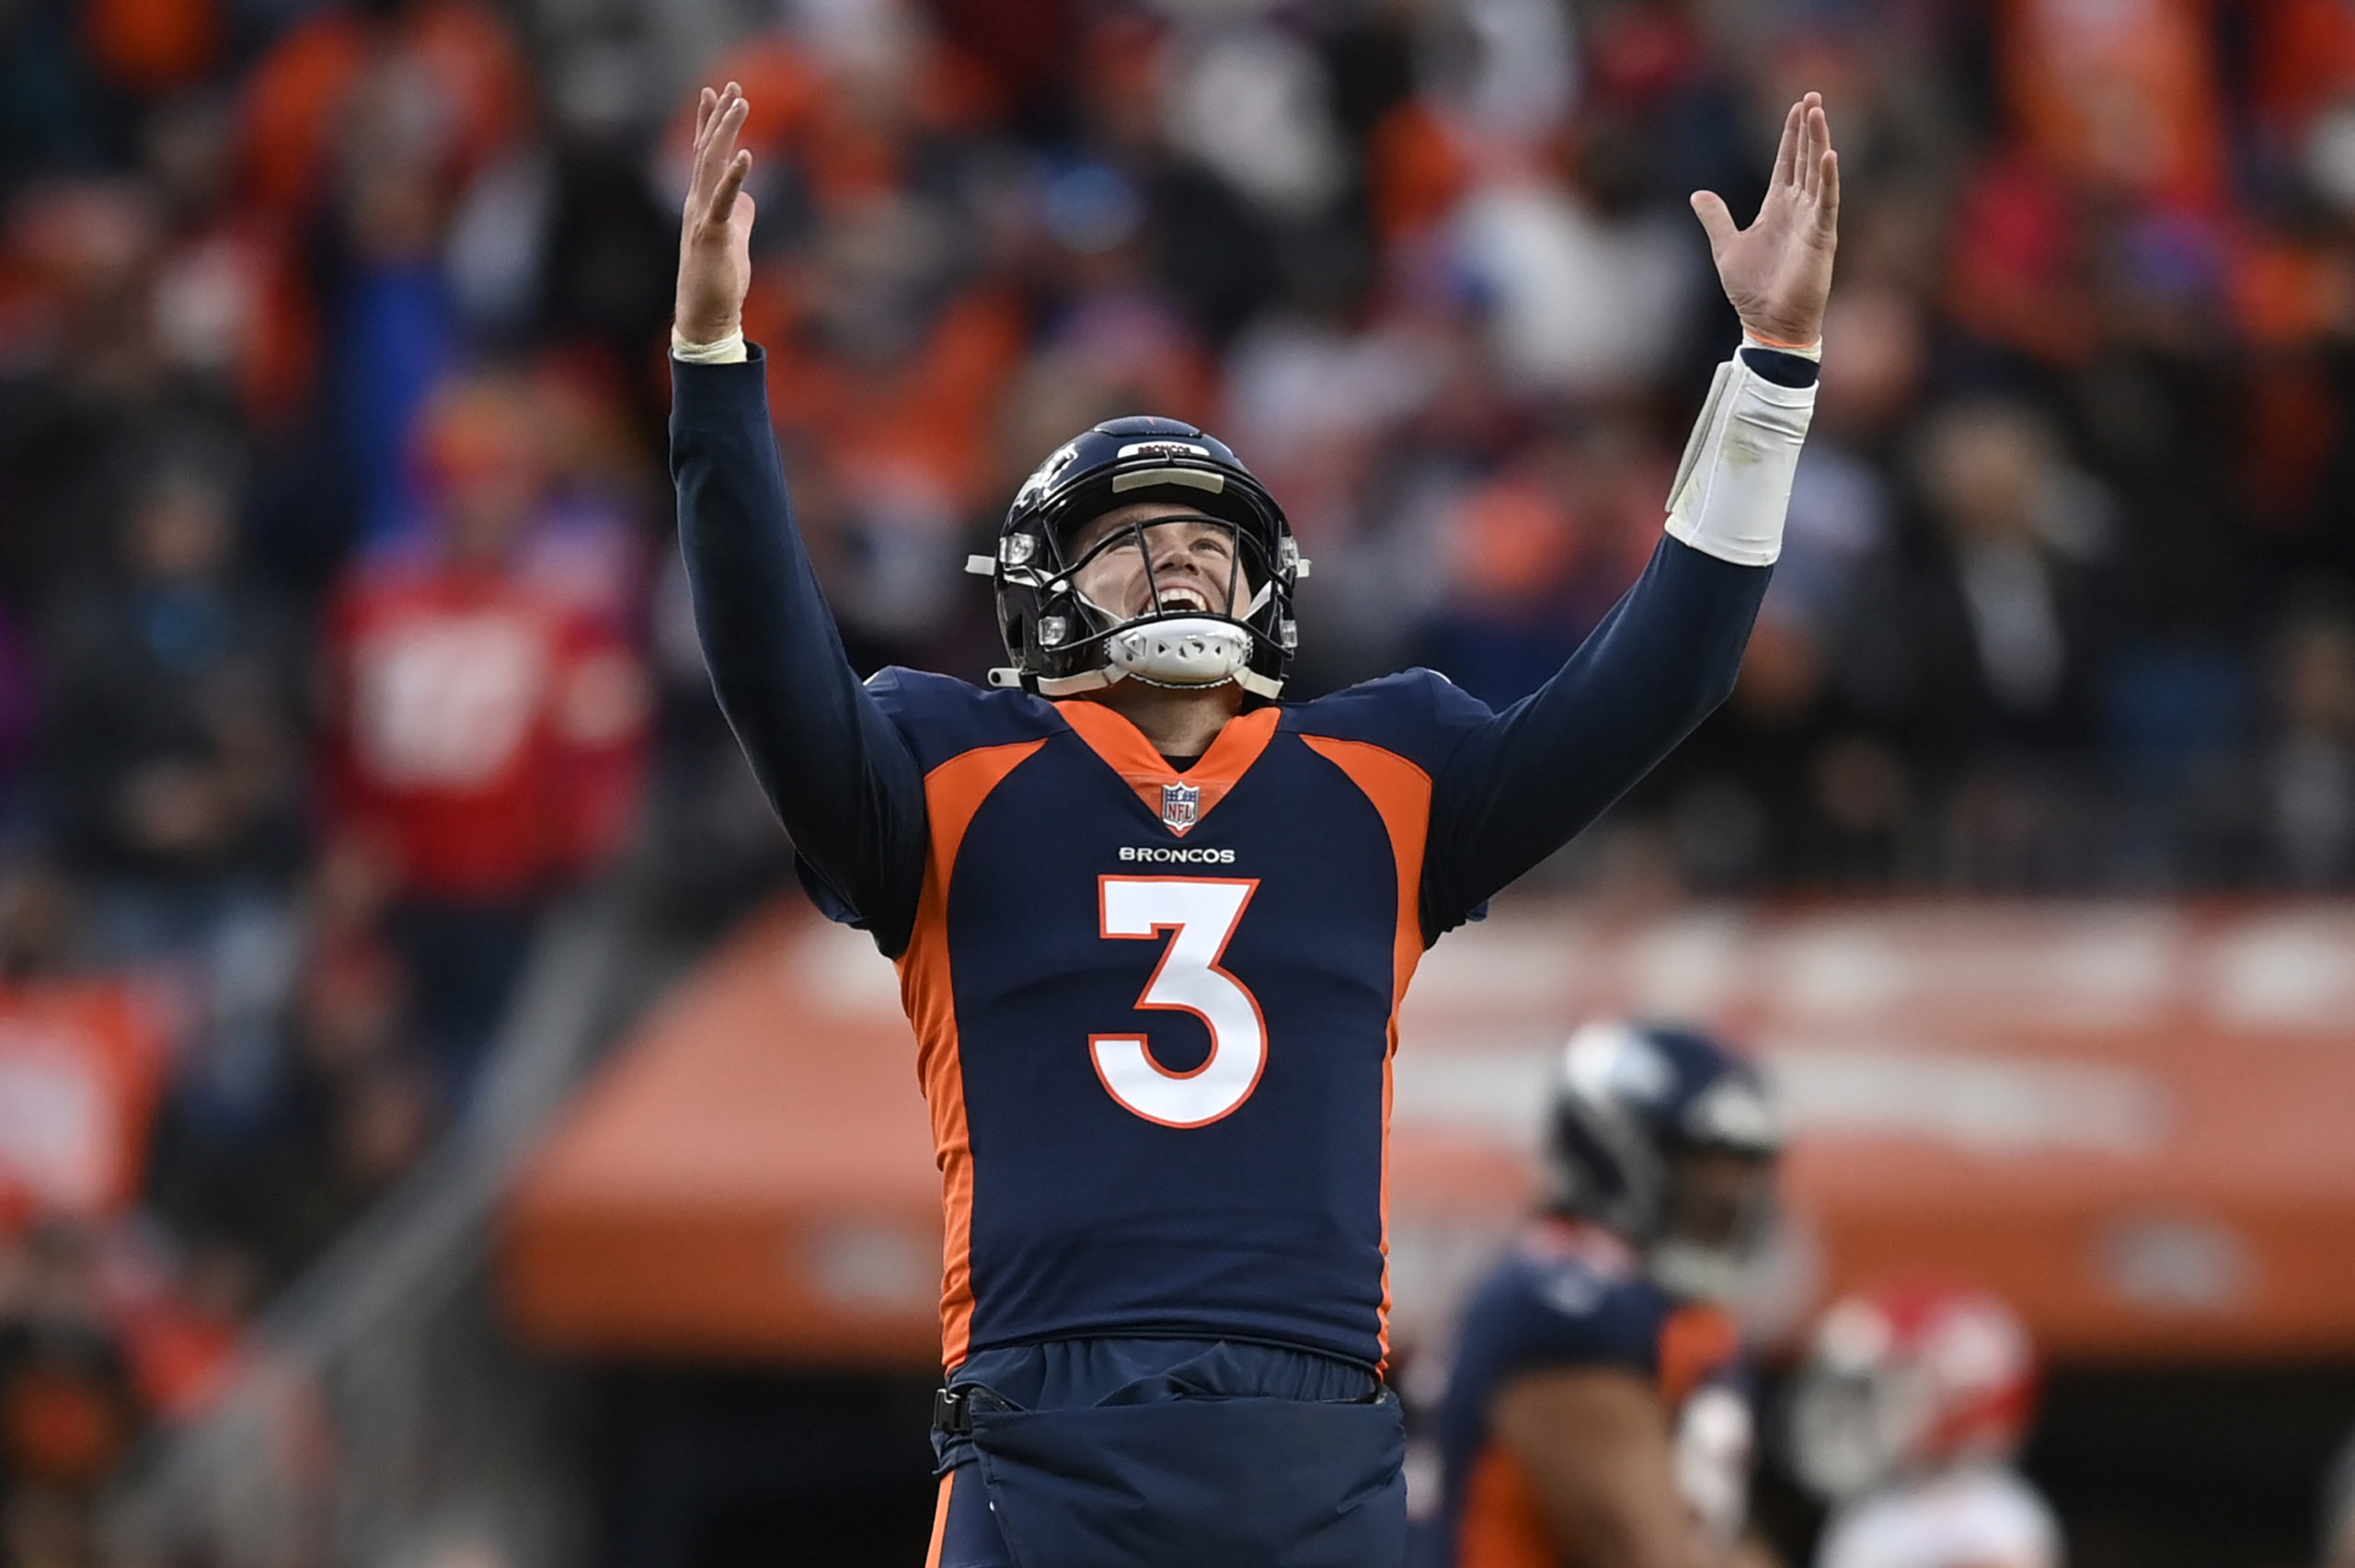 DENVER, COLORADO - JANUARY 08: Drew Lock #3 of the Denver Broncos reacts after Melvin Gordon #25 rushes for a touchdown during the fourth quarter against the Kansas City Chiefs at Empower Field At Mile High on January 08, 2022 in Denver, Colorado. Dustin Bradford/Getty Images